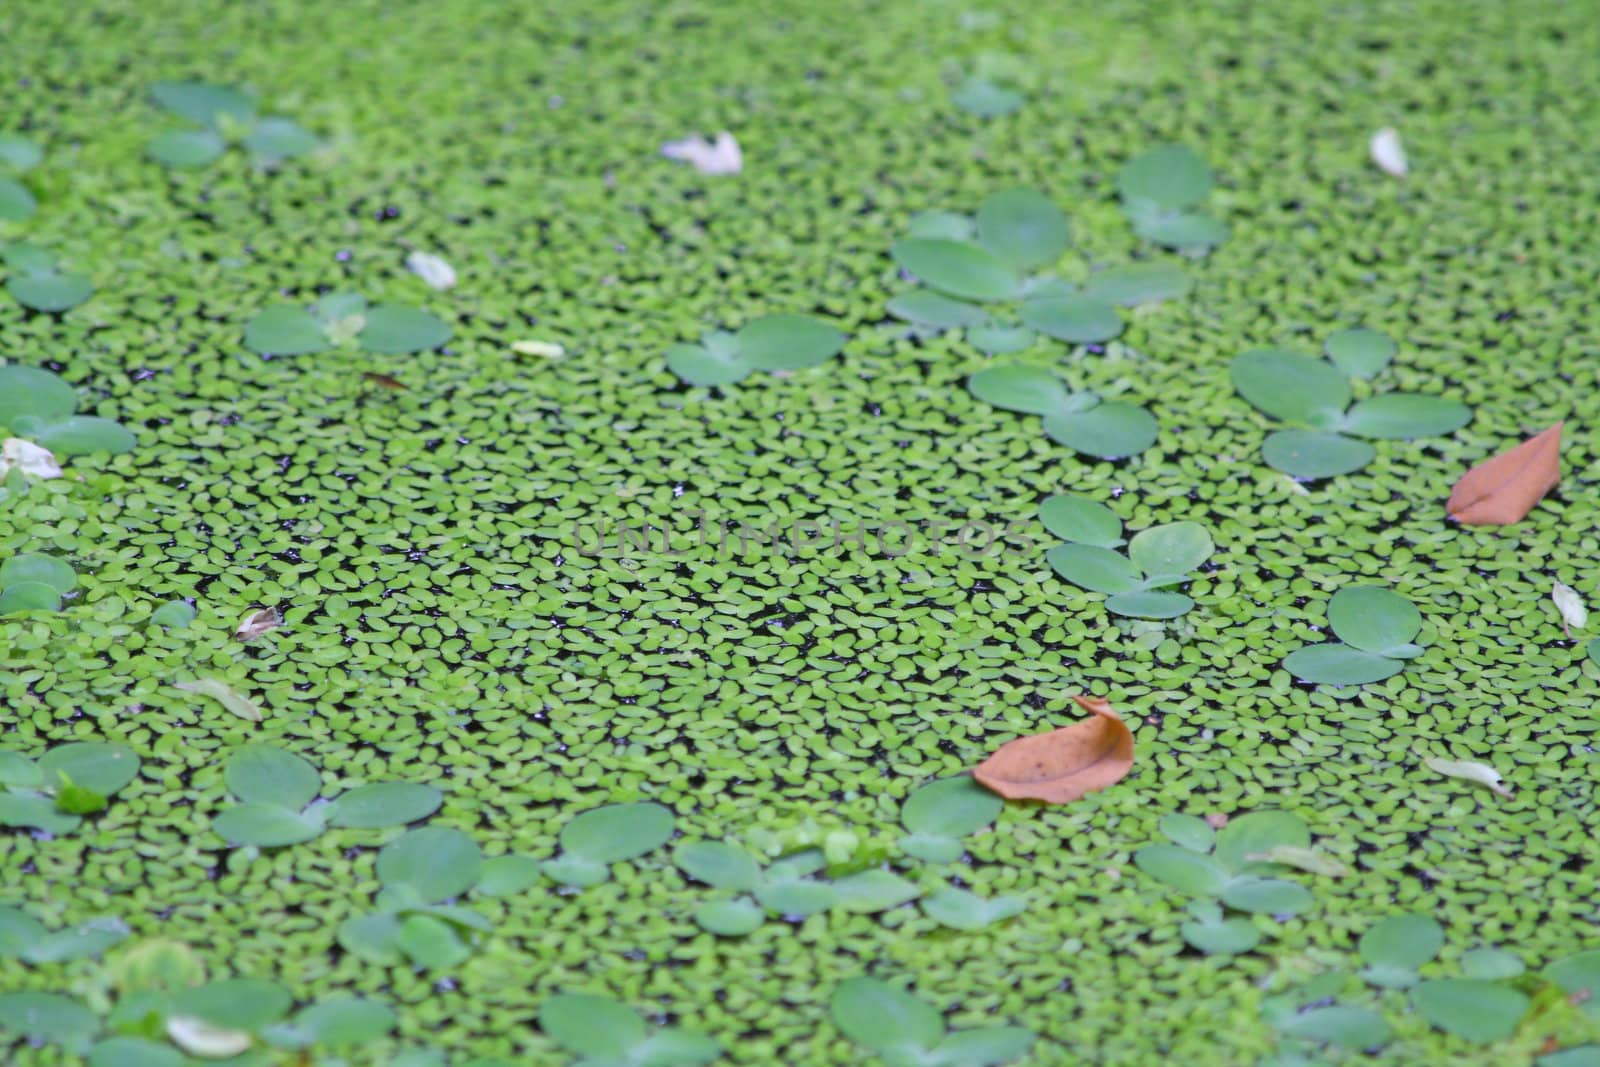 Close up of the green duckweed for the background.